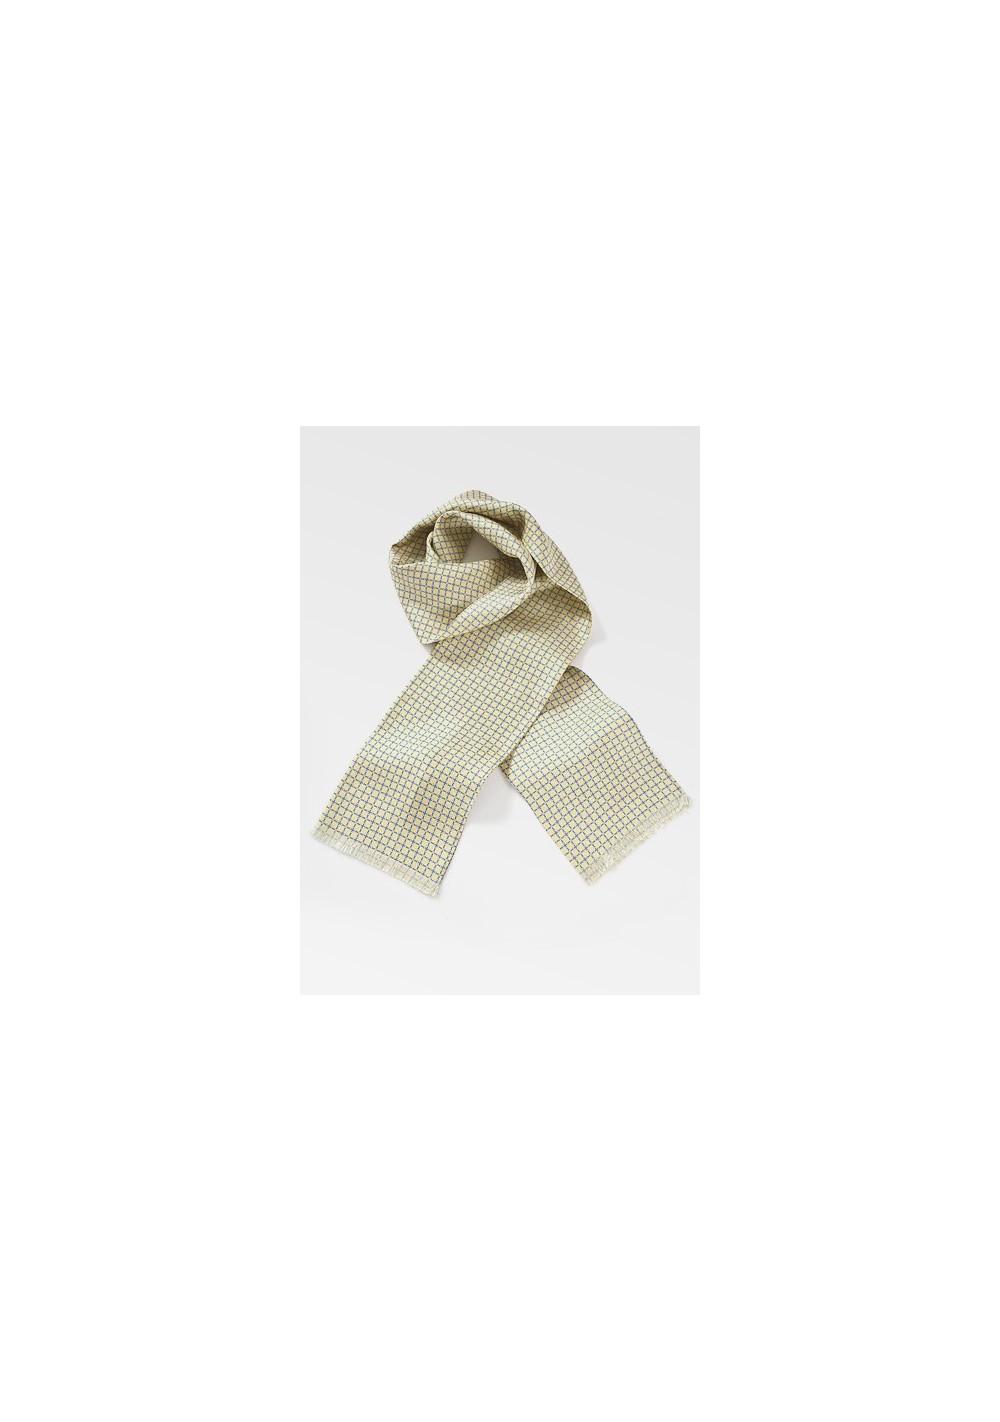 Designer Silk Scarf in Pale Yellows and Blues